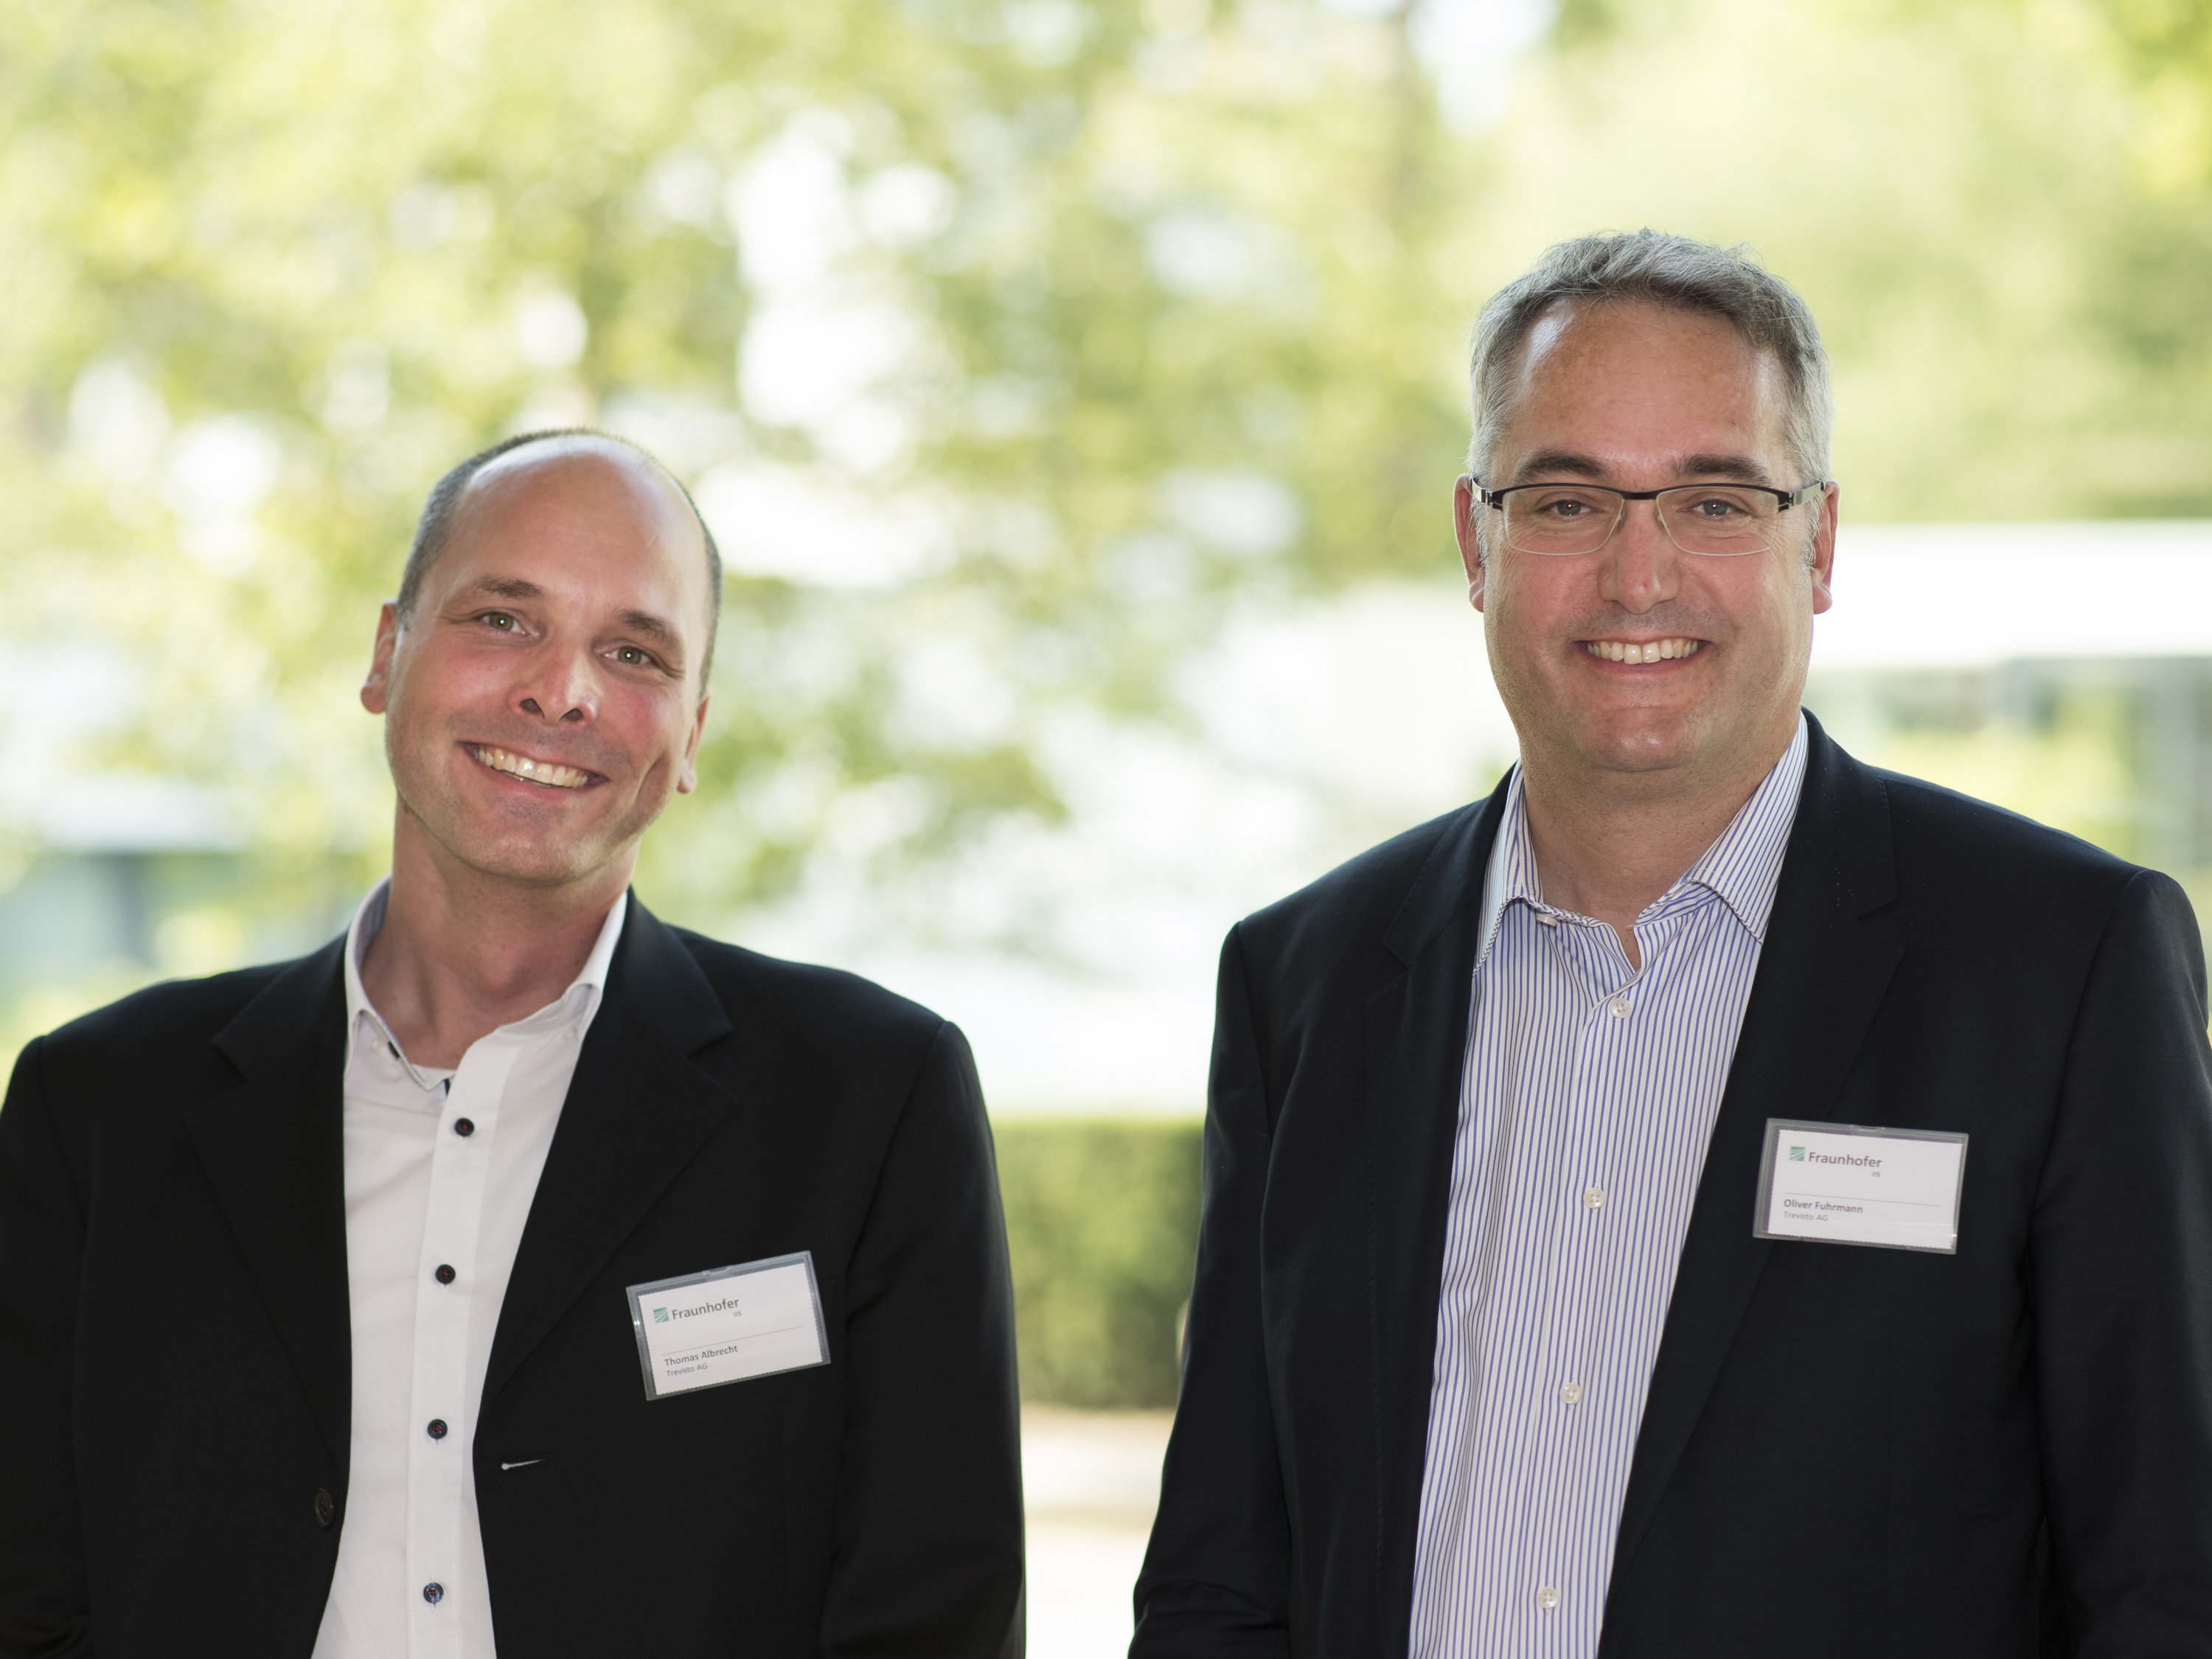 Thomas Albrecht, Lead Consultant, and Oliver Fuhrmann, Head of Business Development, Trevisto AG